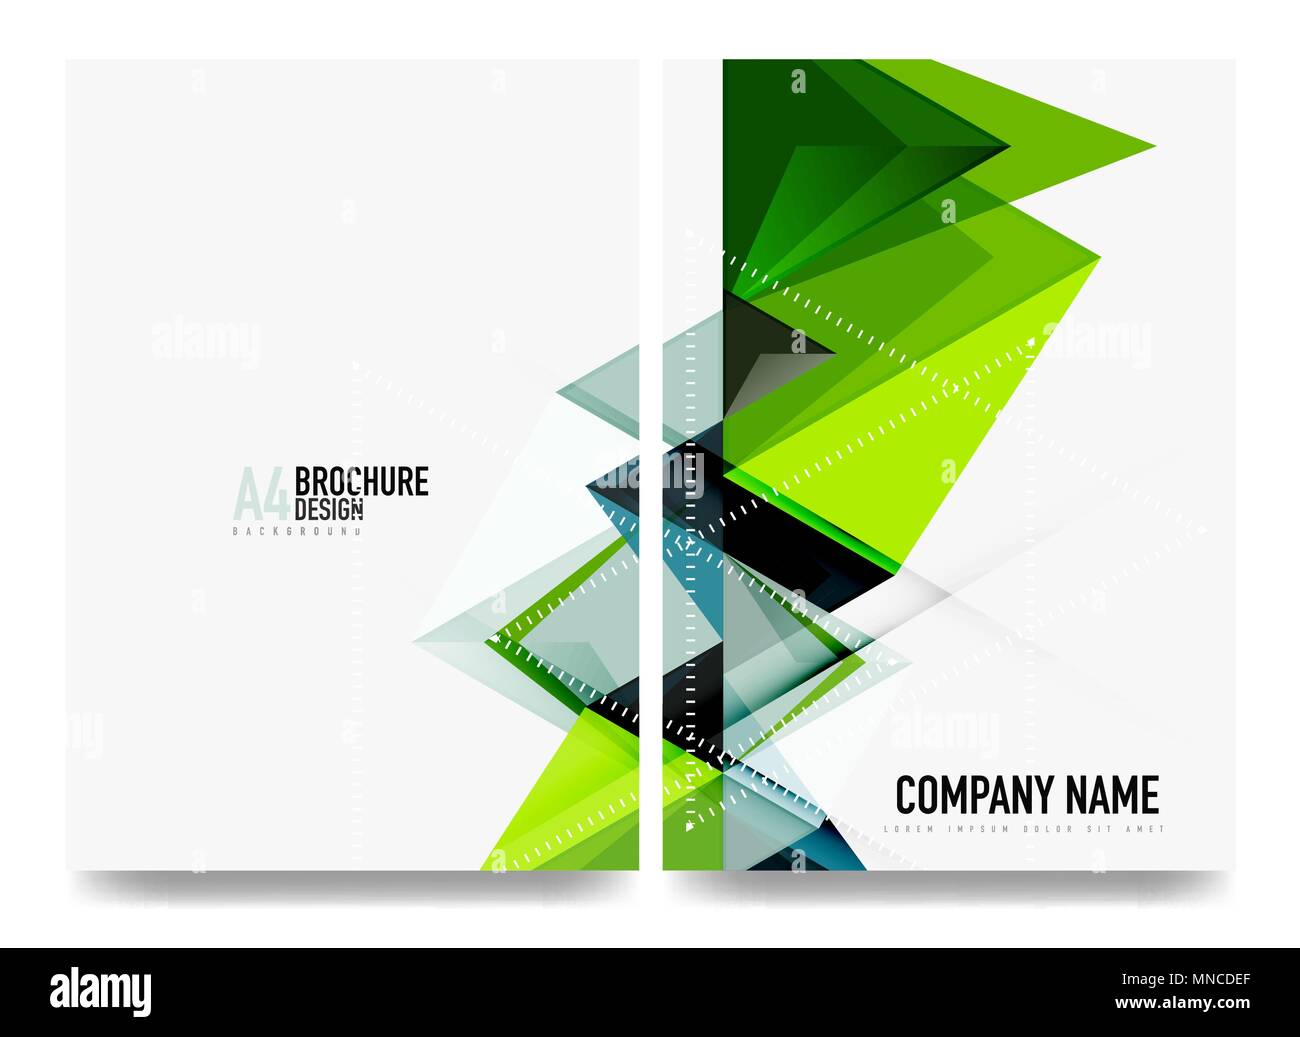 Business Brochure Cover Layout Flyer Template Business Brochure Cover Layout Flyer Template Triangle Green And Blue Geometric Design Stock Vector Image Art Alamy